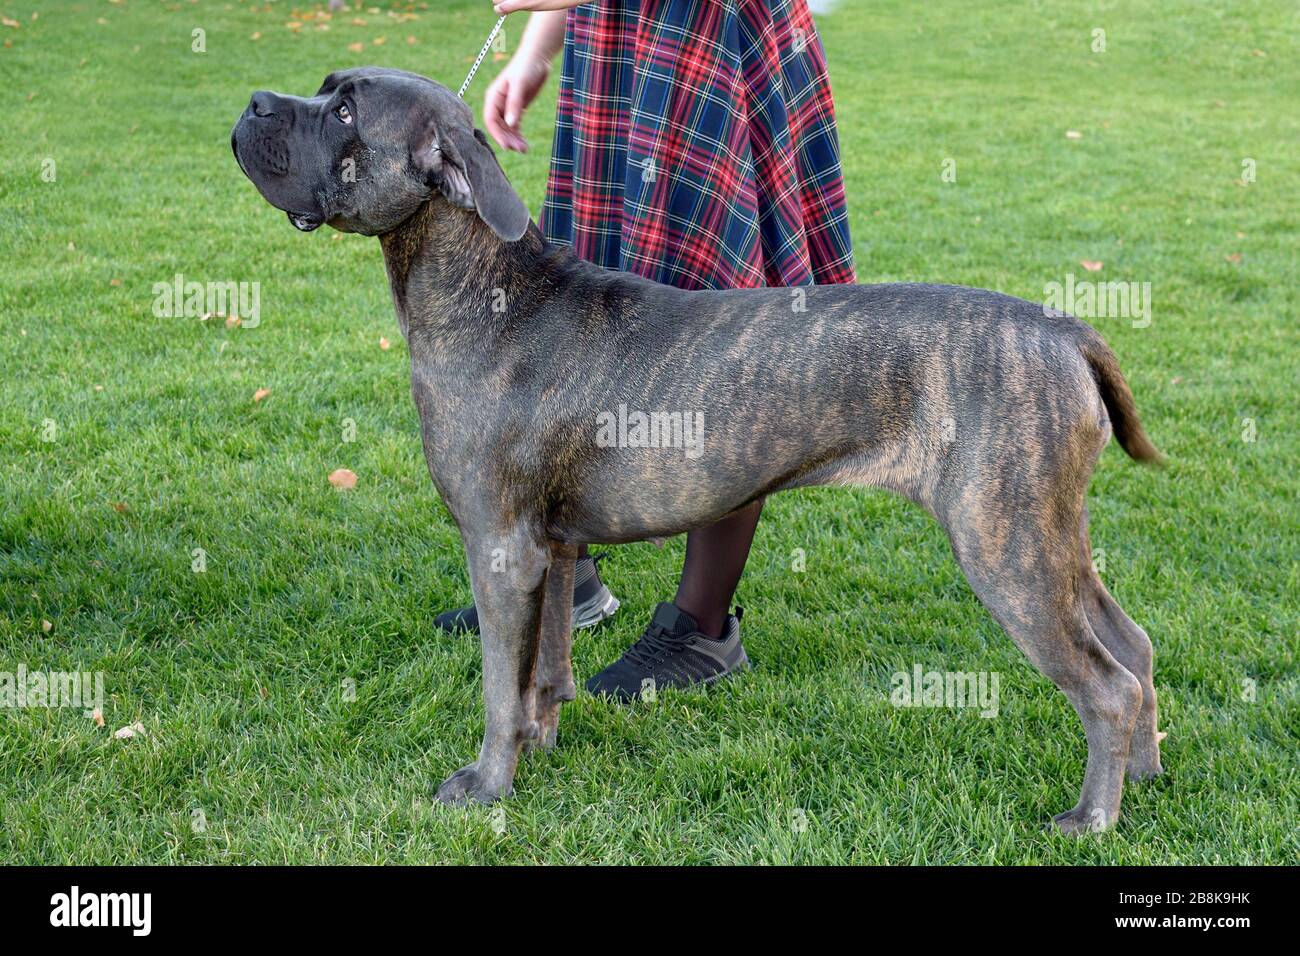 Dogo Canario stands next to his mistress against a green lawn. Dog walking in the spring. A large gray dog on a leash is looking up with a sad face. Stock Photo